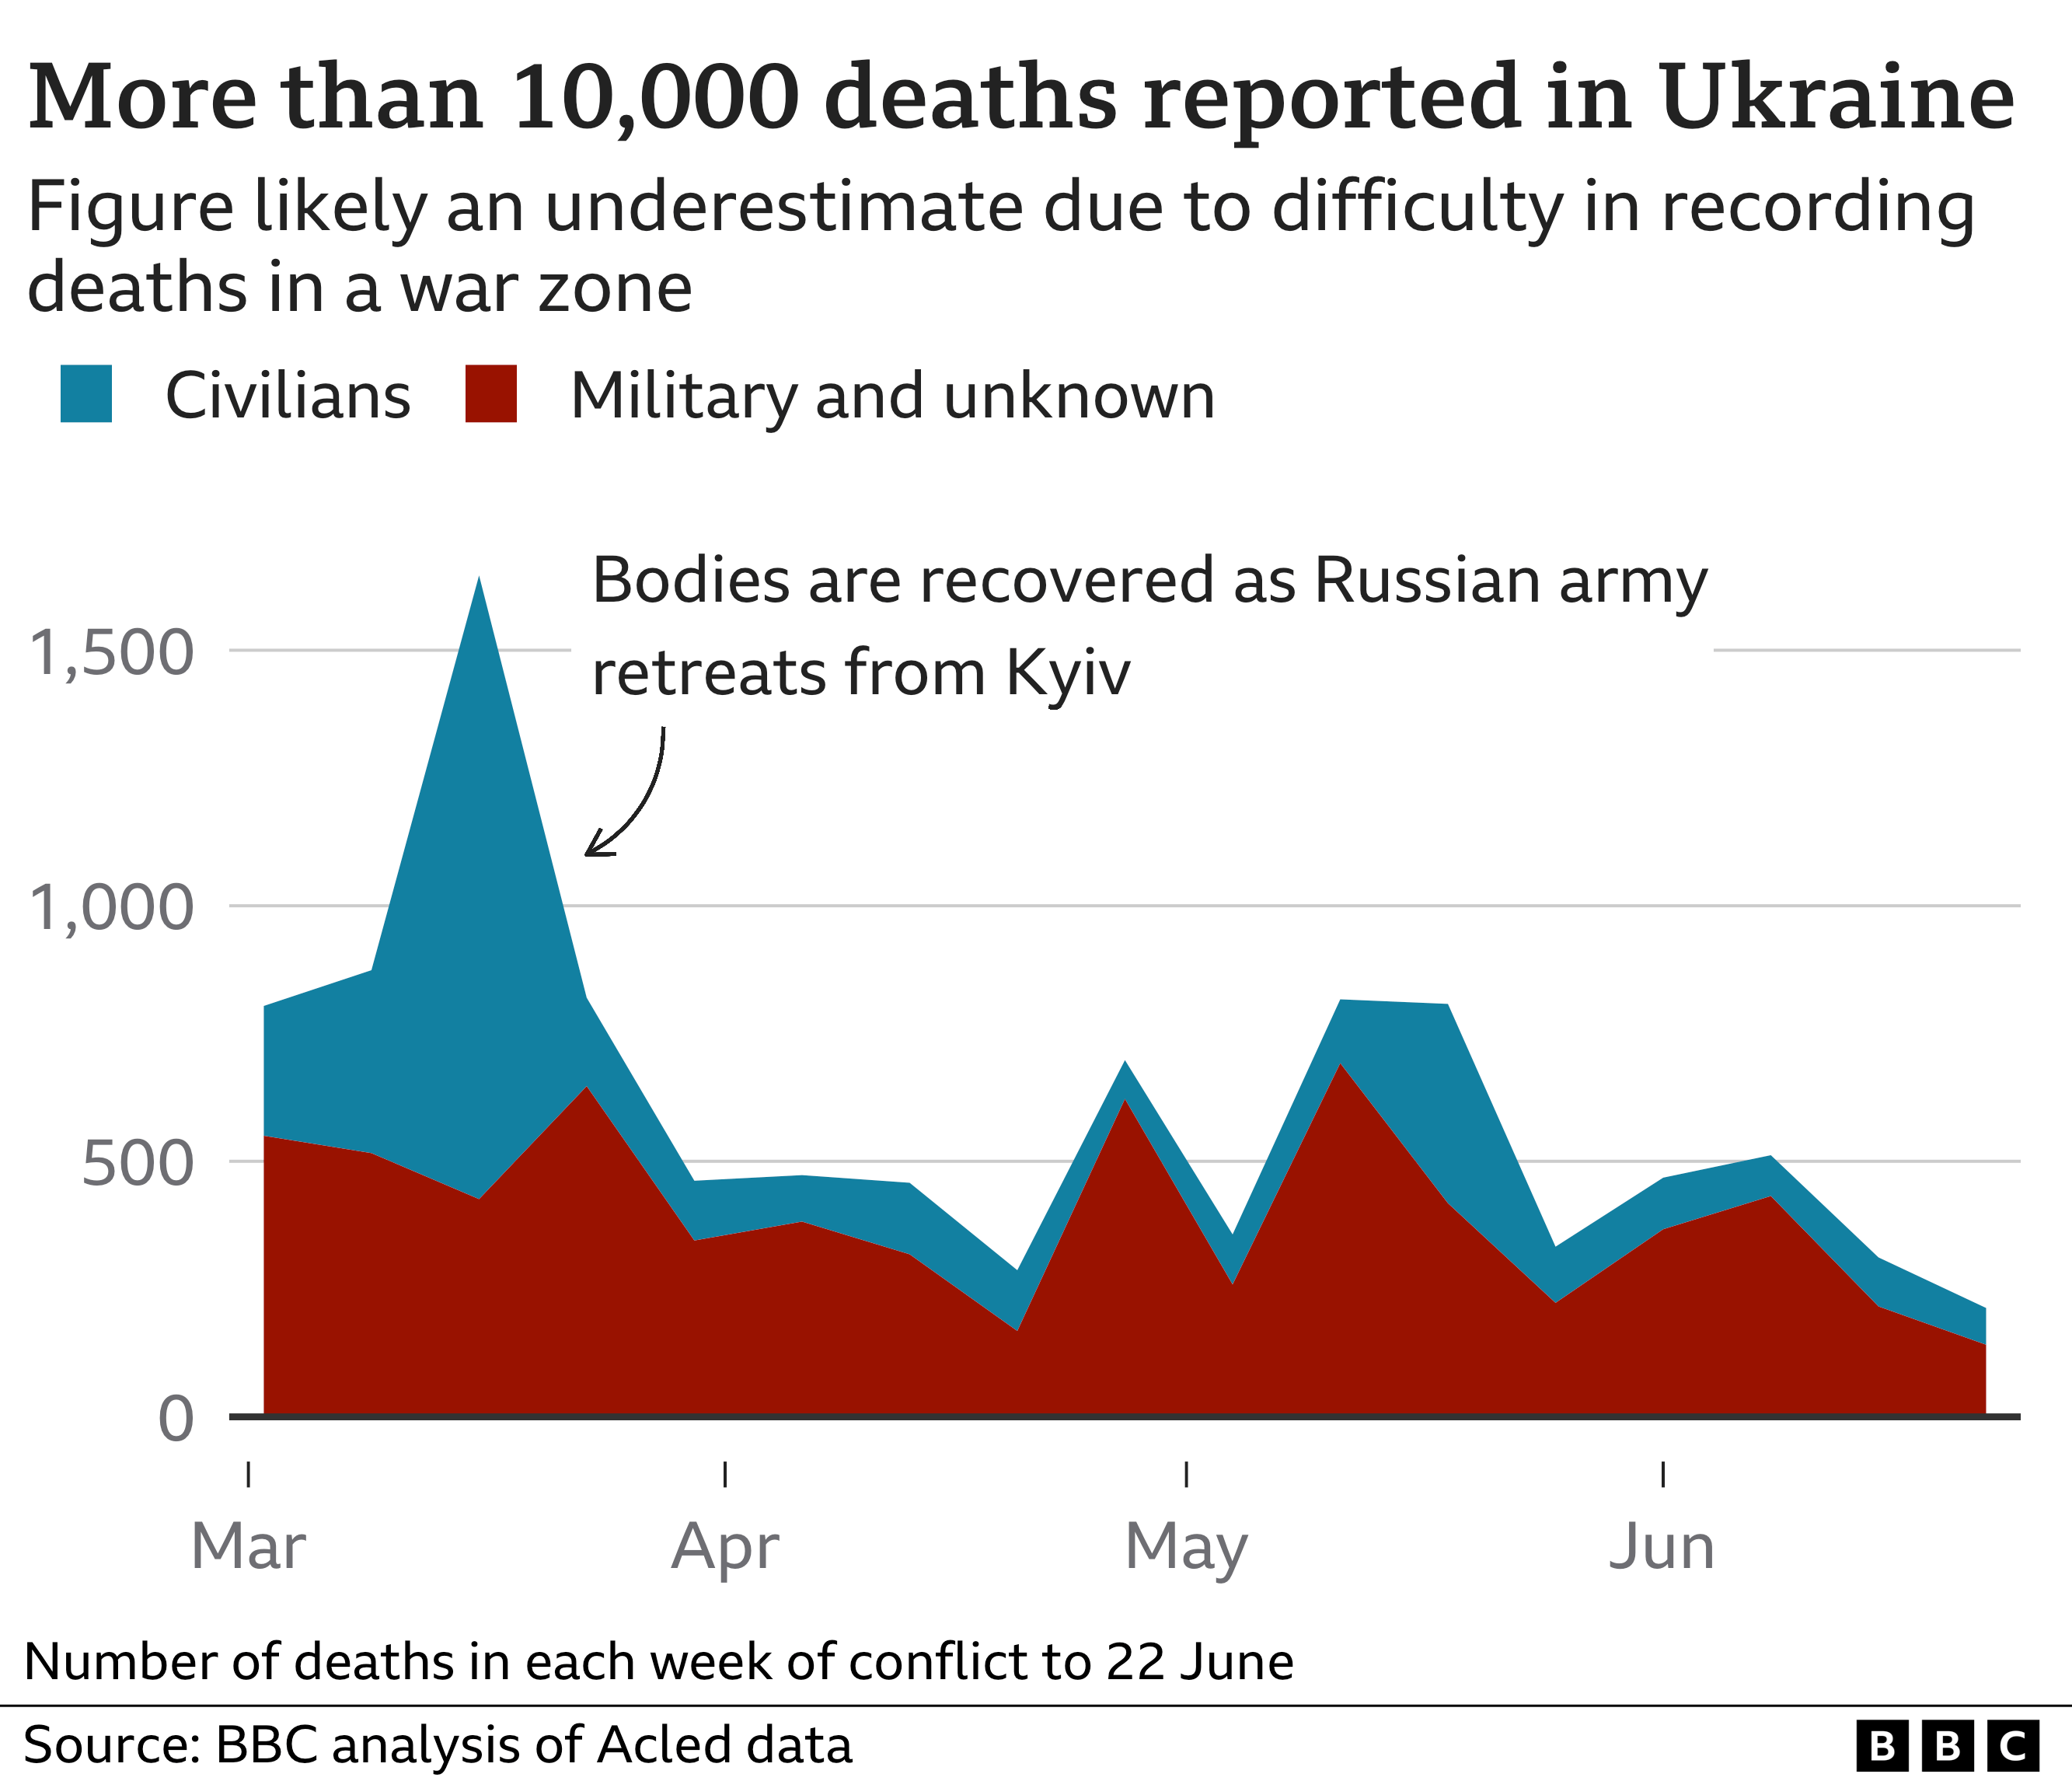 Chart showing the number of deaths reported in Acled's data for each week of conflict from 24 February to 22 June. A spike in civilian casualties in March is due to a high number of bodies recovered as the Russian army retreated from Kyiv. There have been more than 10,000 deaths in total in Ukraine, but this is likely an underestimate due to the difficulty of recording deaths in a war zone.